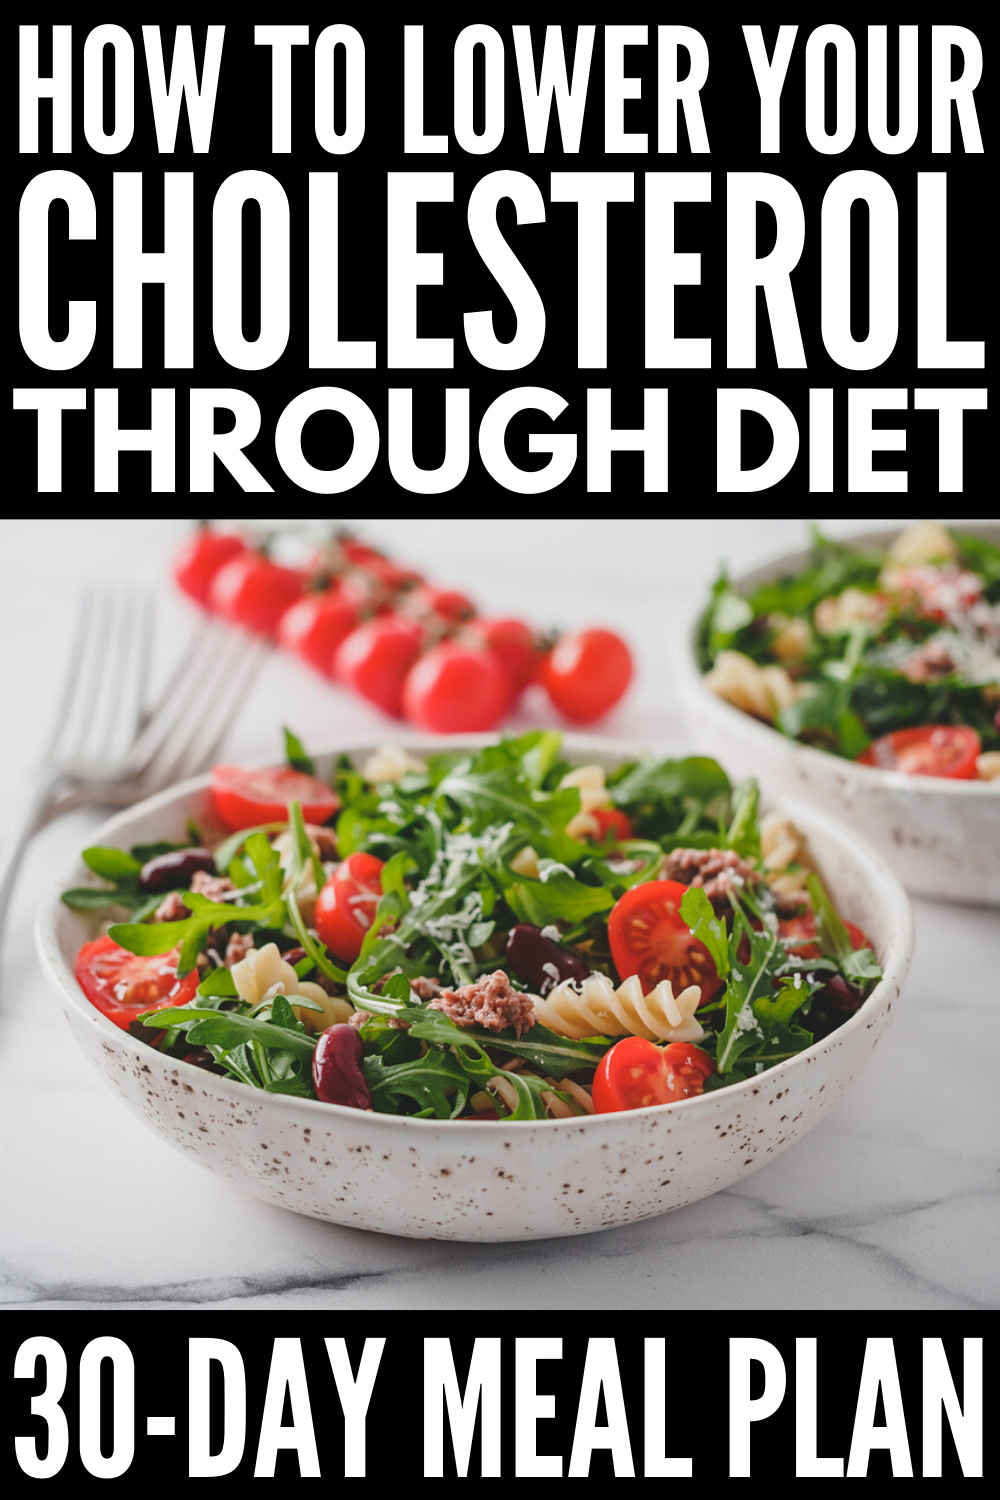 30 Days of Cholesterol Diet Recipes You